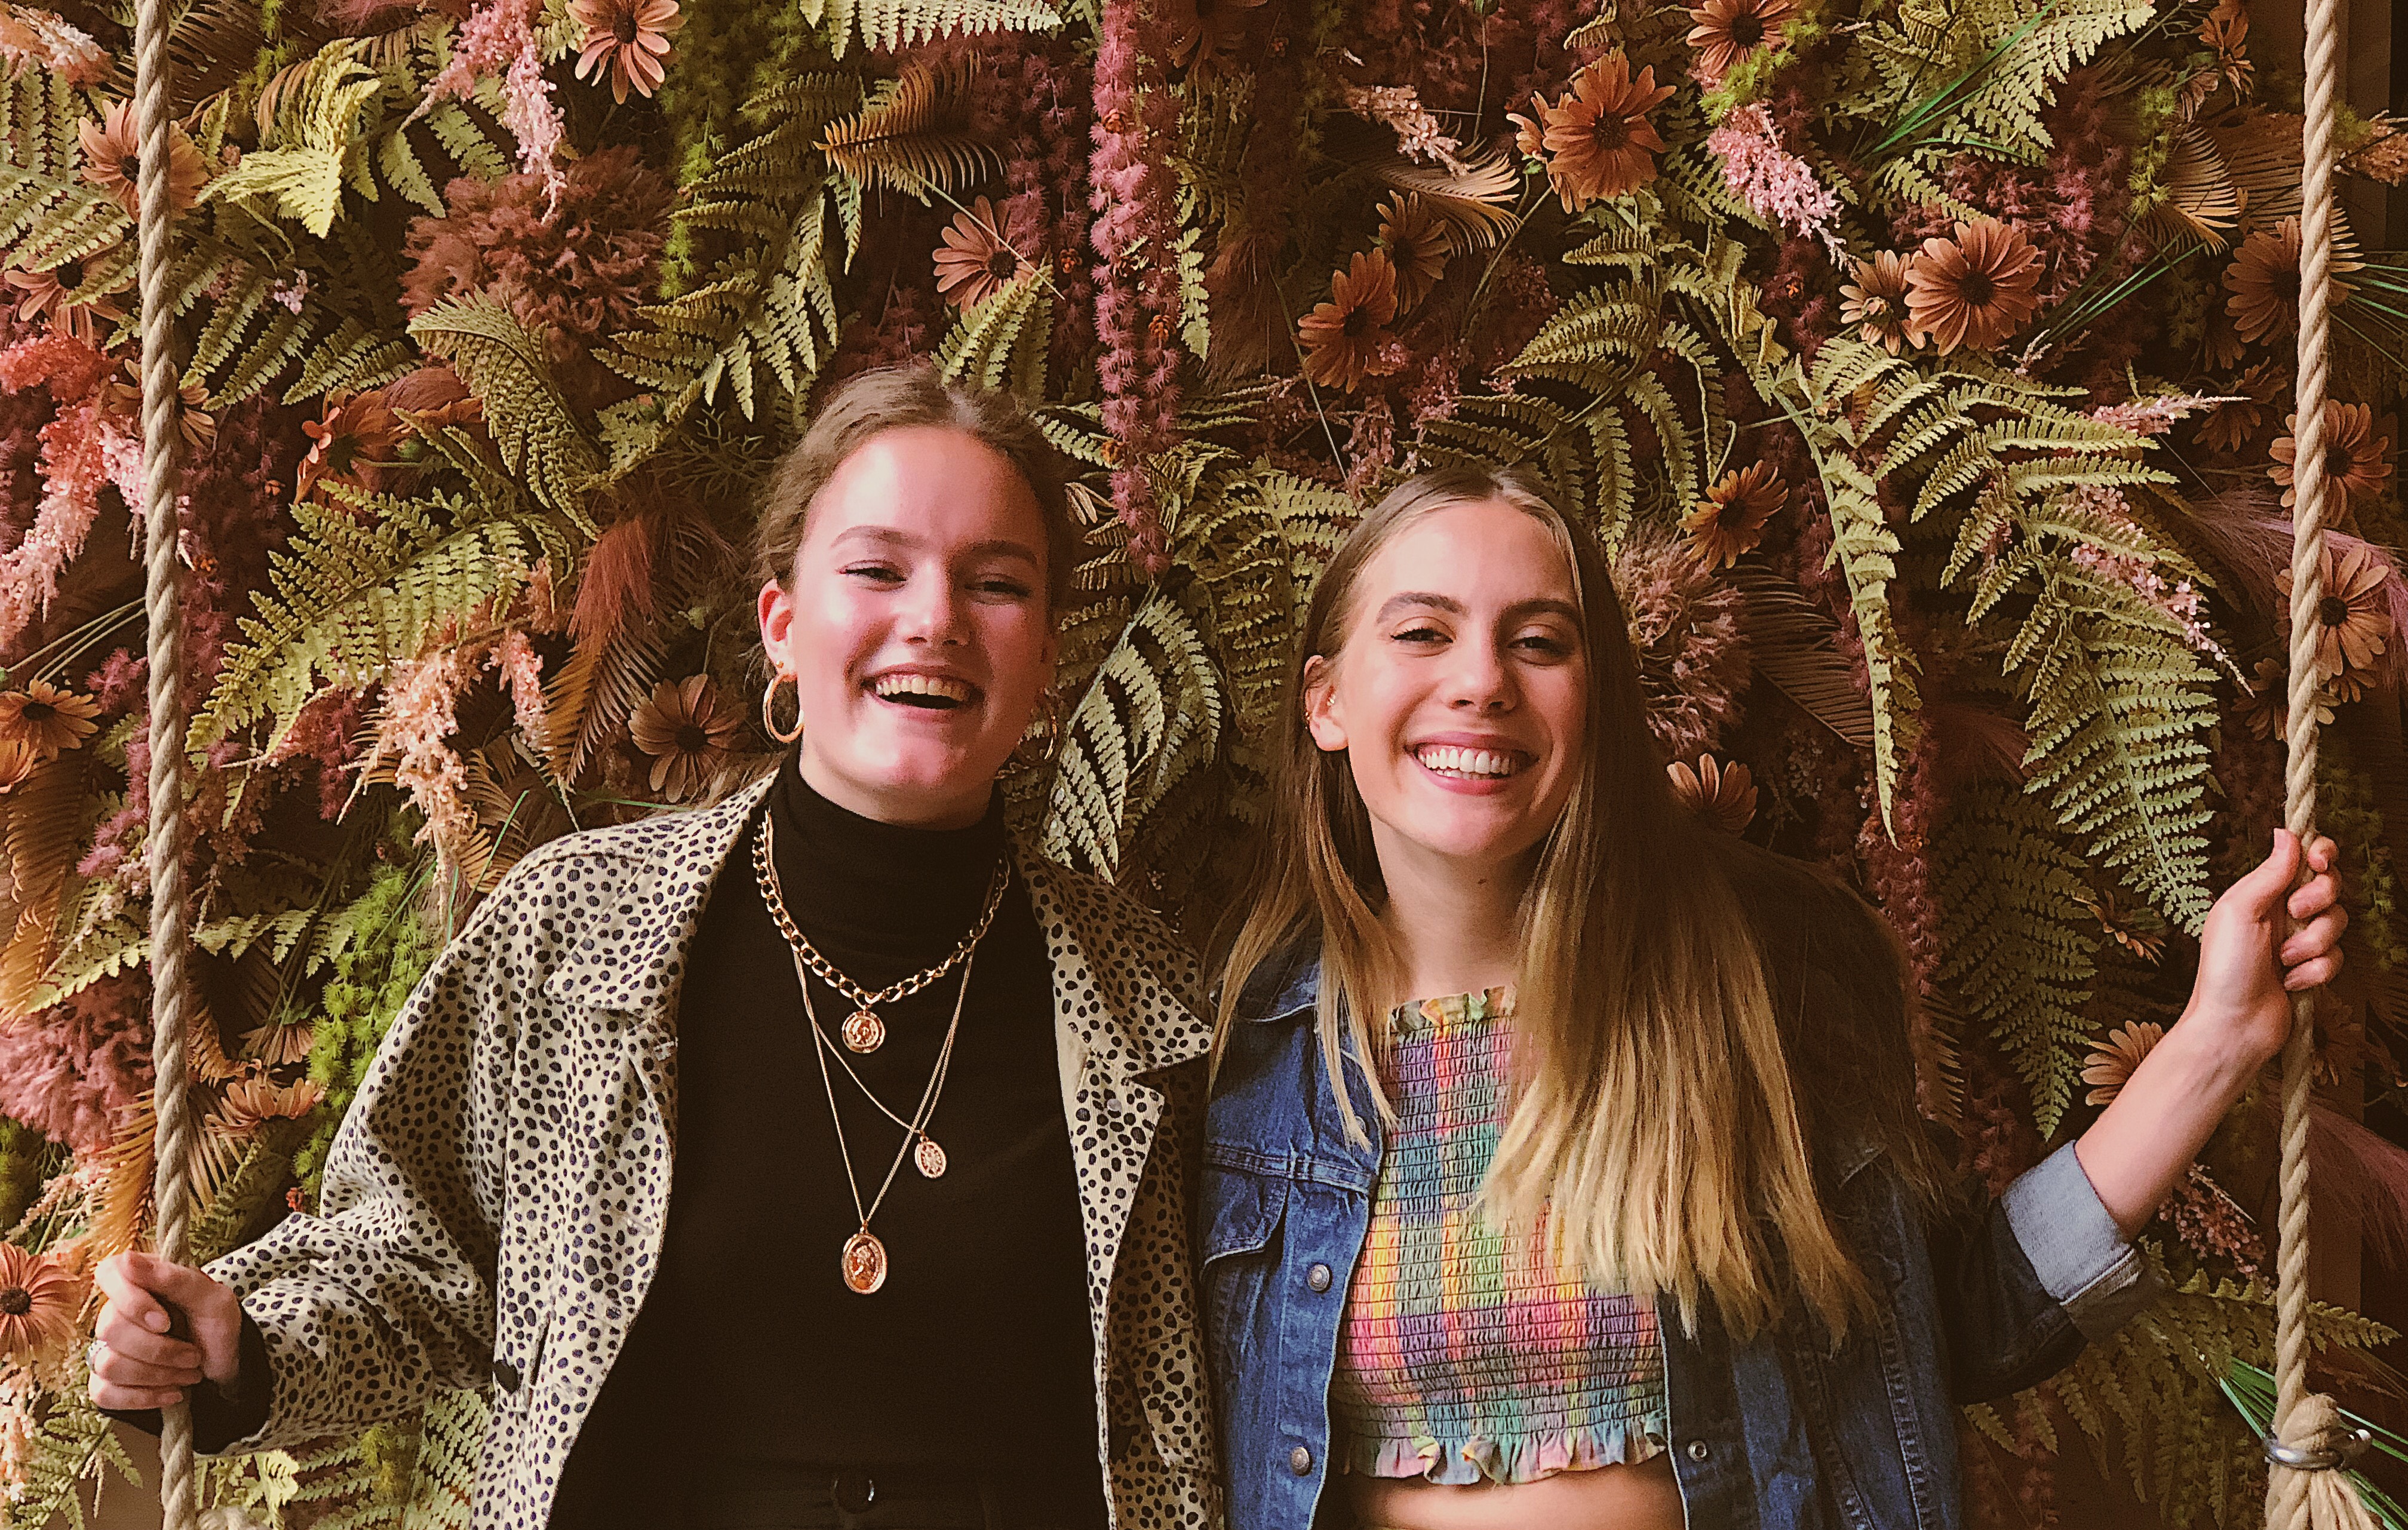 Candace and Mandy at a cafe in front of a flower wall in Amsterdam, Netherlands; Mandy is wearing a black turtle neck, cheetah print jacket, and gold necklaces, Candace is wearing a denim Levi's jacket and plaid crop top..